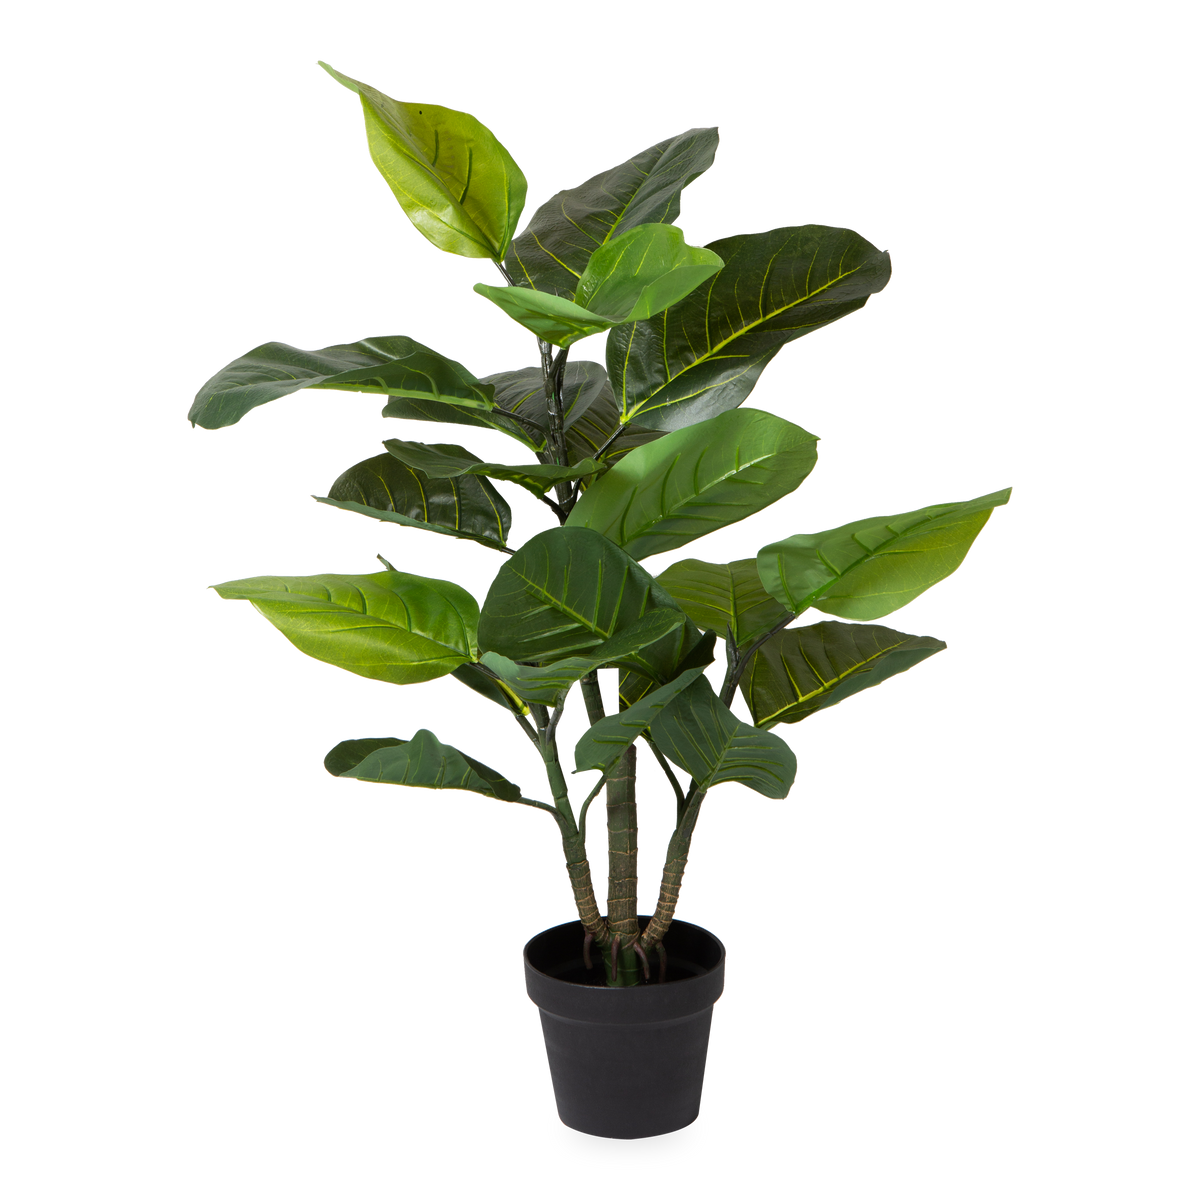 The Rubber Plant adds a tropical vibe to your space with big green leaves and stems.